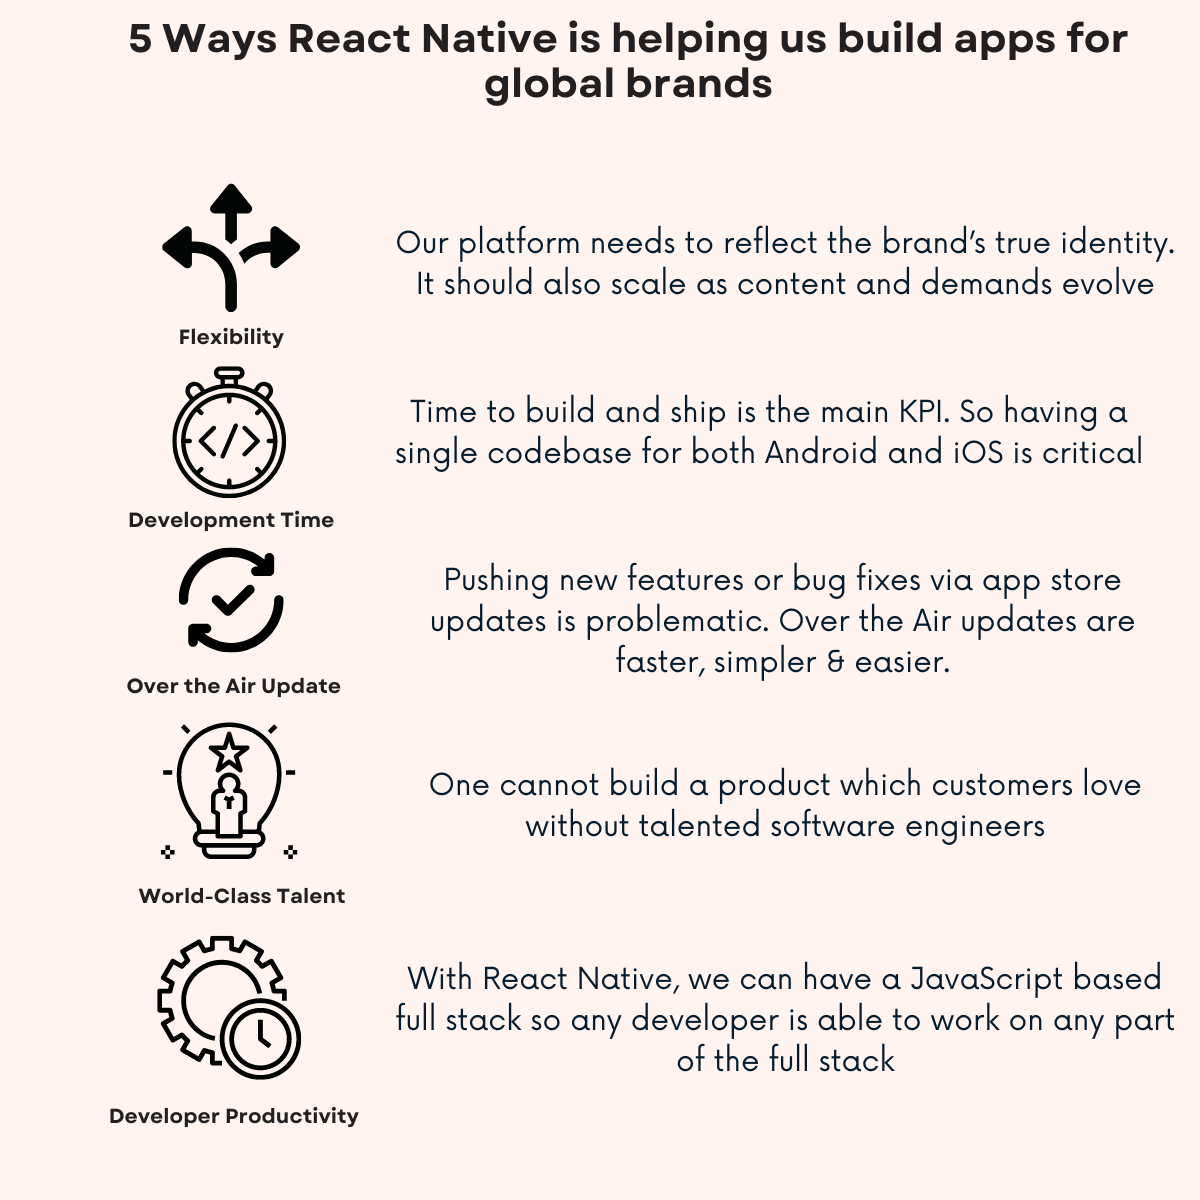 The 5 Ways React Native is Helping Us Build Apps for Global Brands